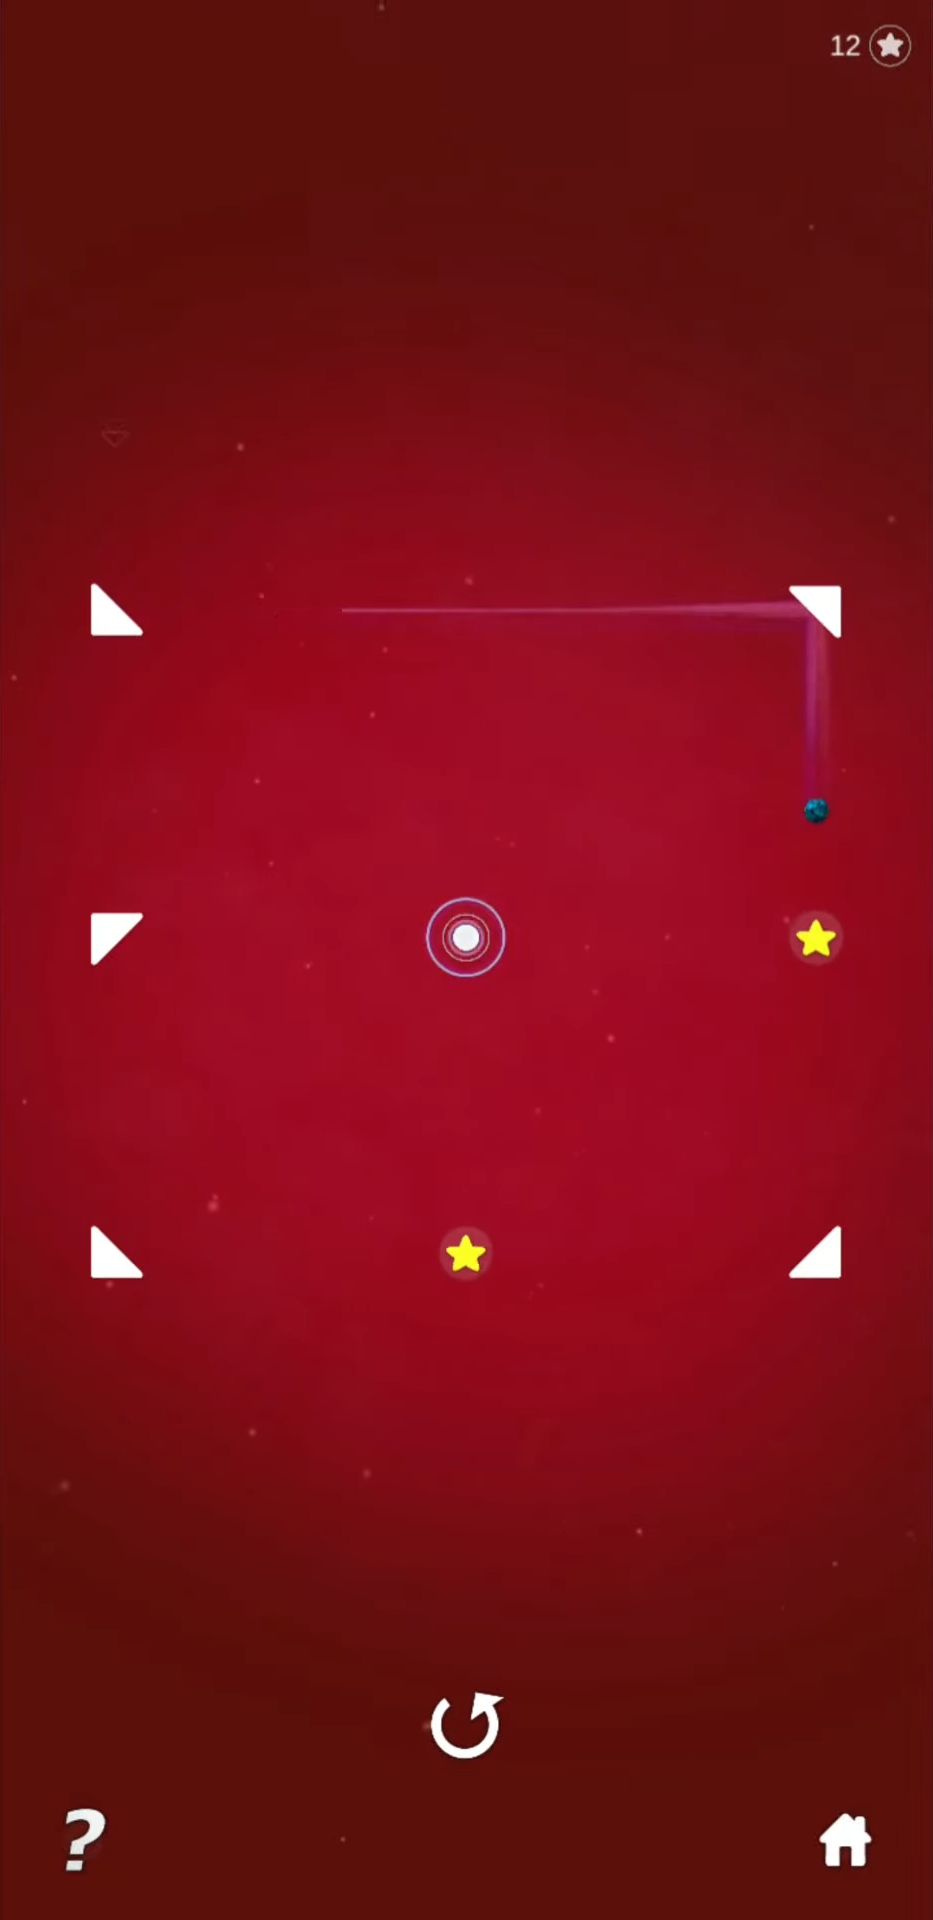 Télécharger Meteorite Ball Reflection and Recoil Brain Teaser pour Android gratuit.